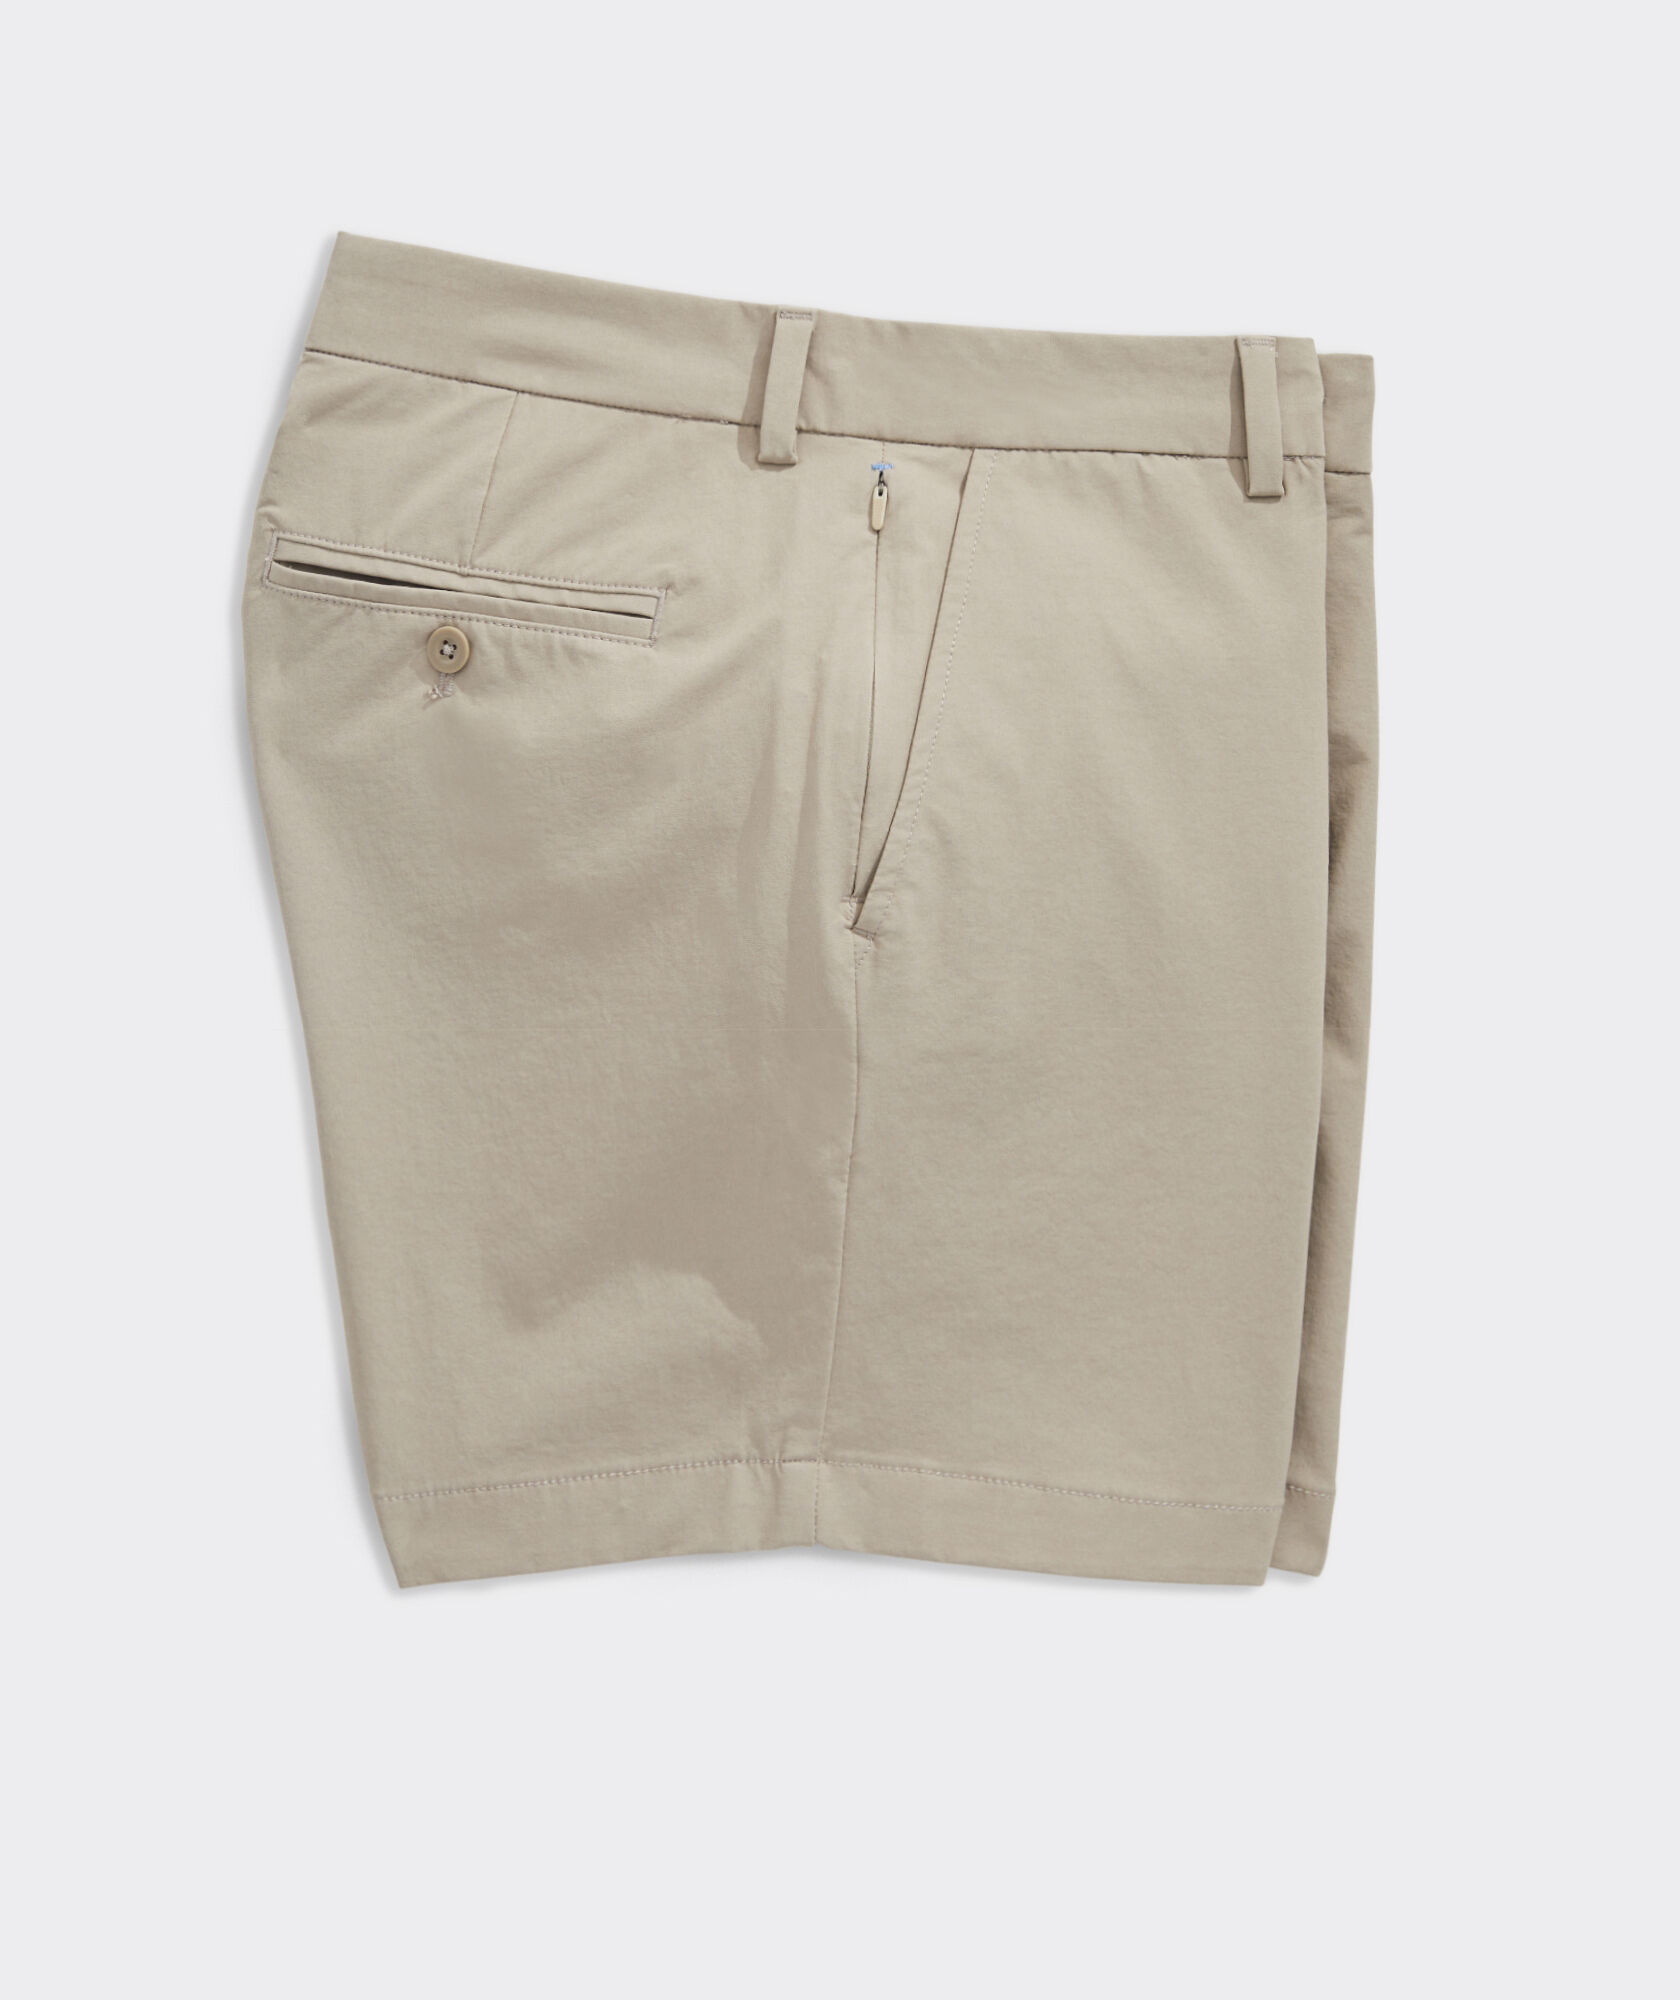 Shop On-The-Go Shorts at vineyard vines